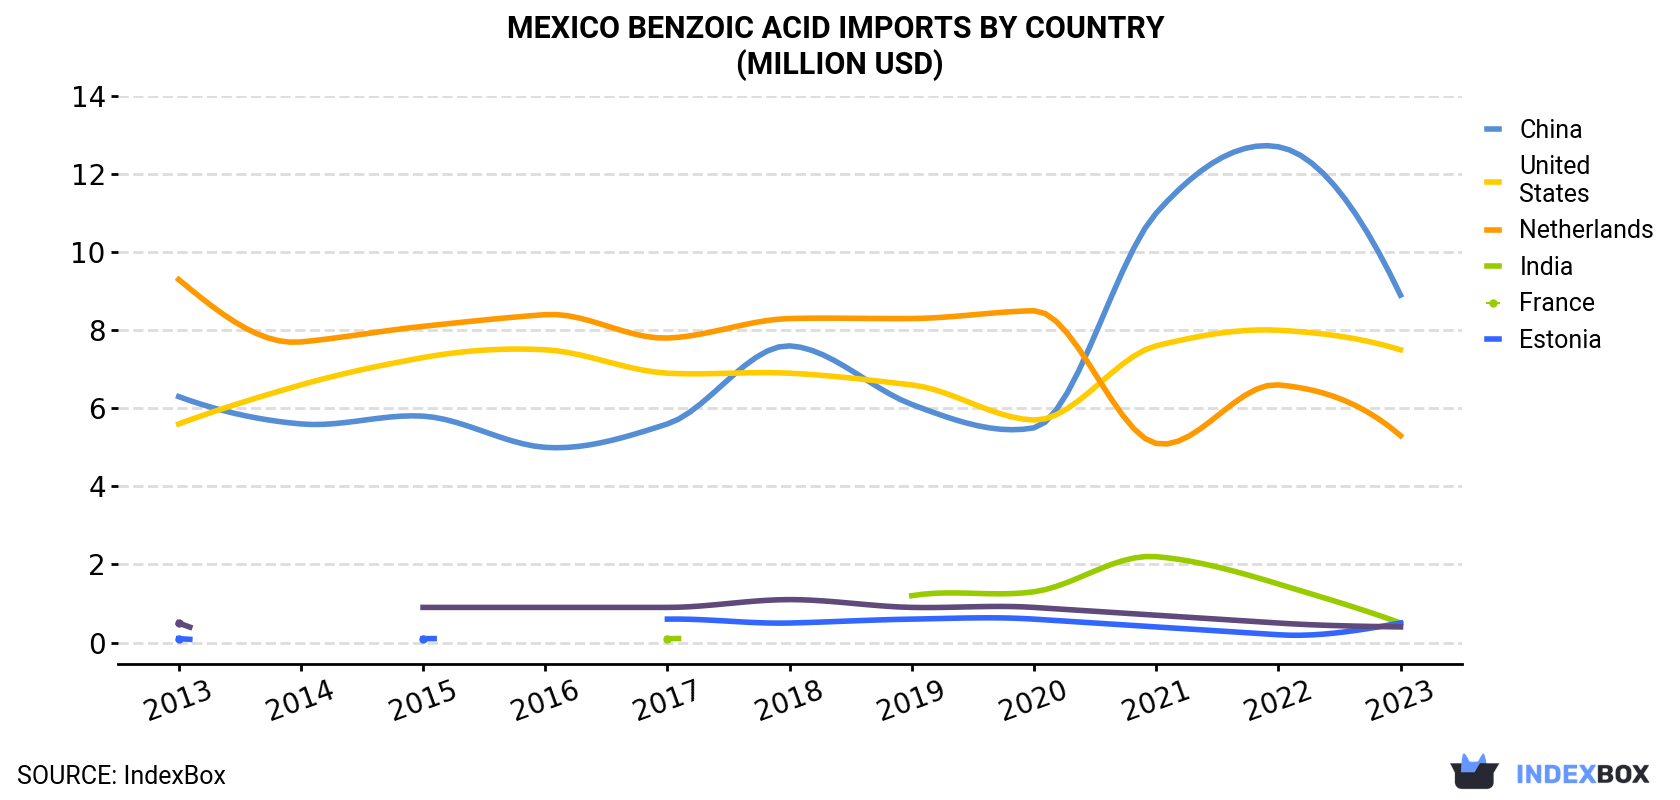 Mexico Benzoic Acid Imports By Country (Million USD)